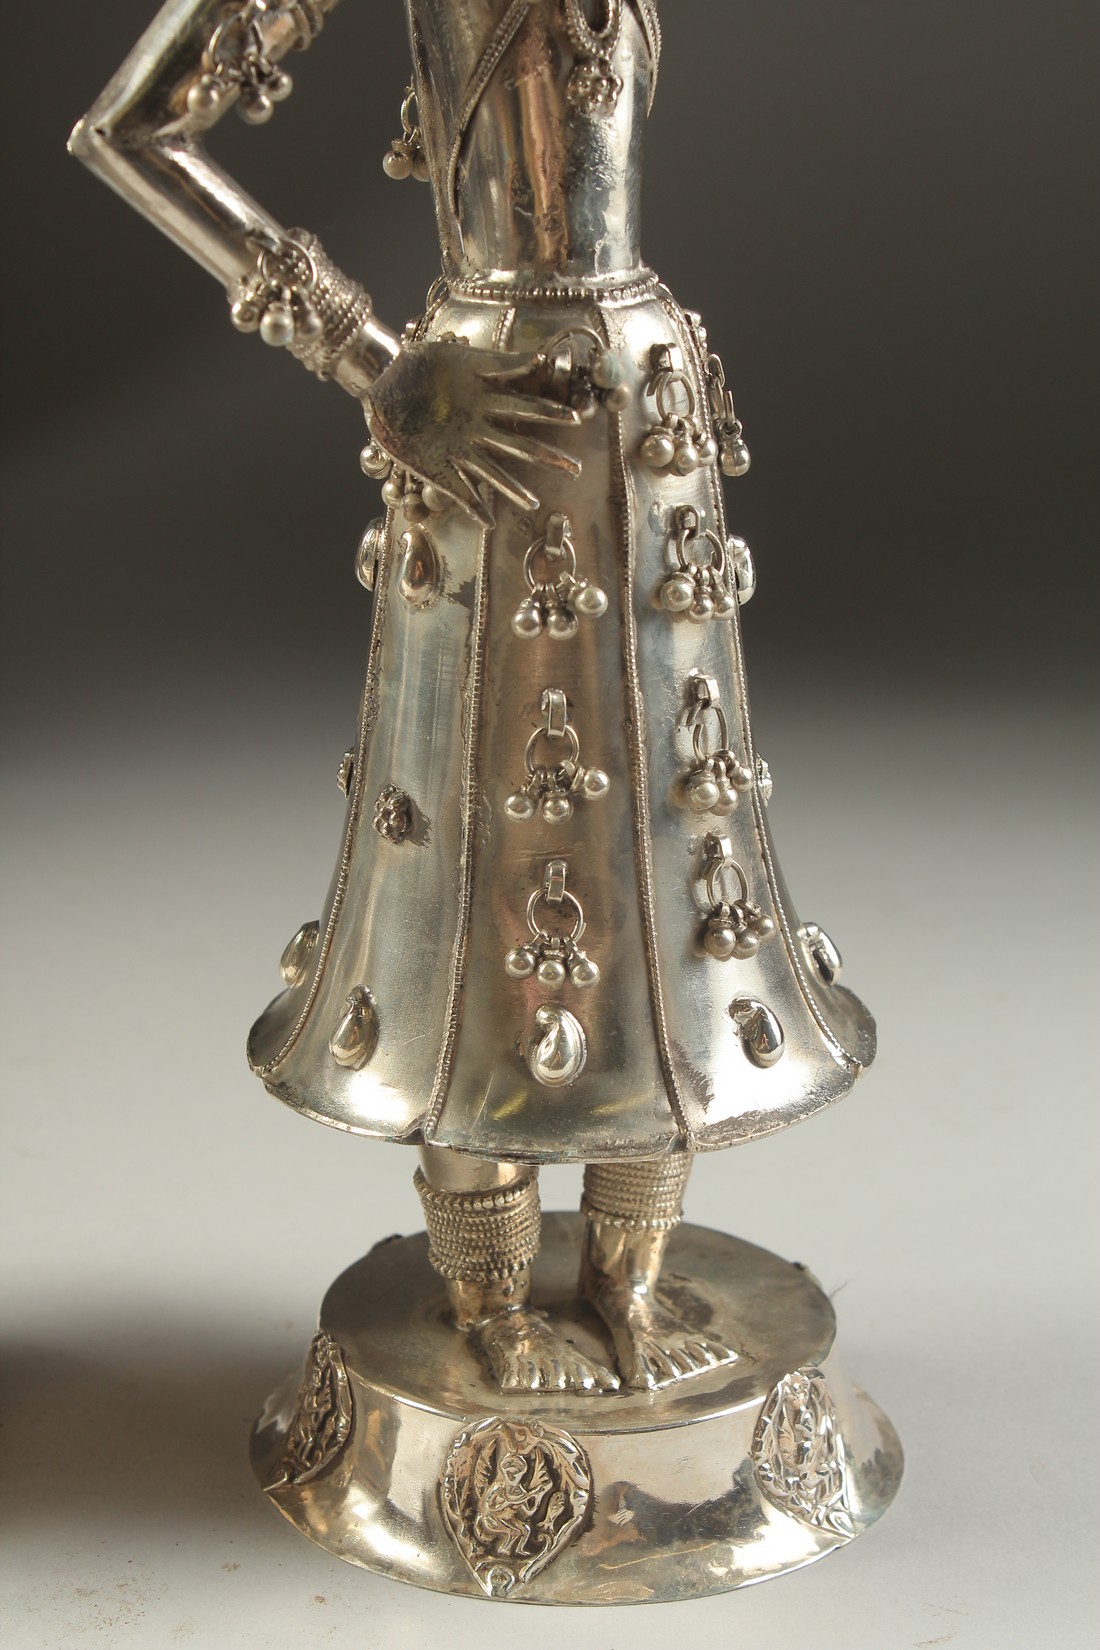 A FINE PAIR OF 19TH CENTURY INDIAN SILVER FIGURES OF MUSICIANS, 30cm high. - Image 7 of 11